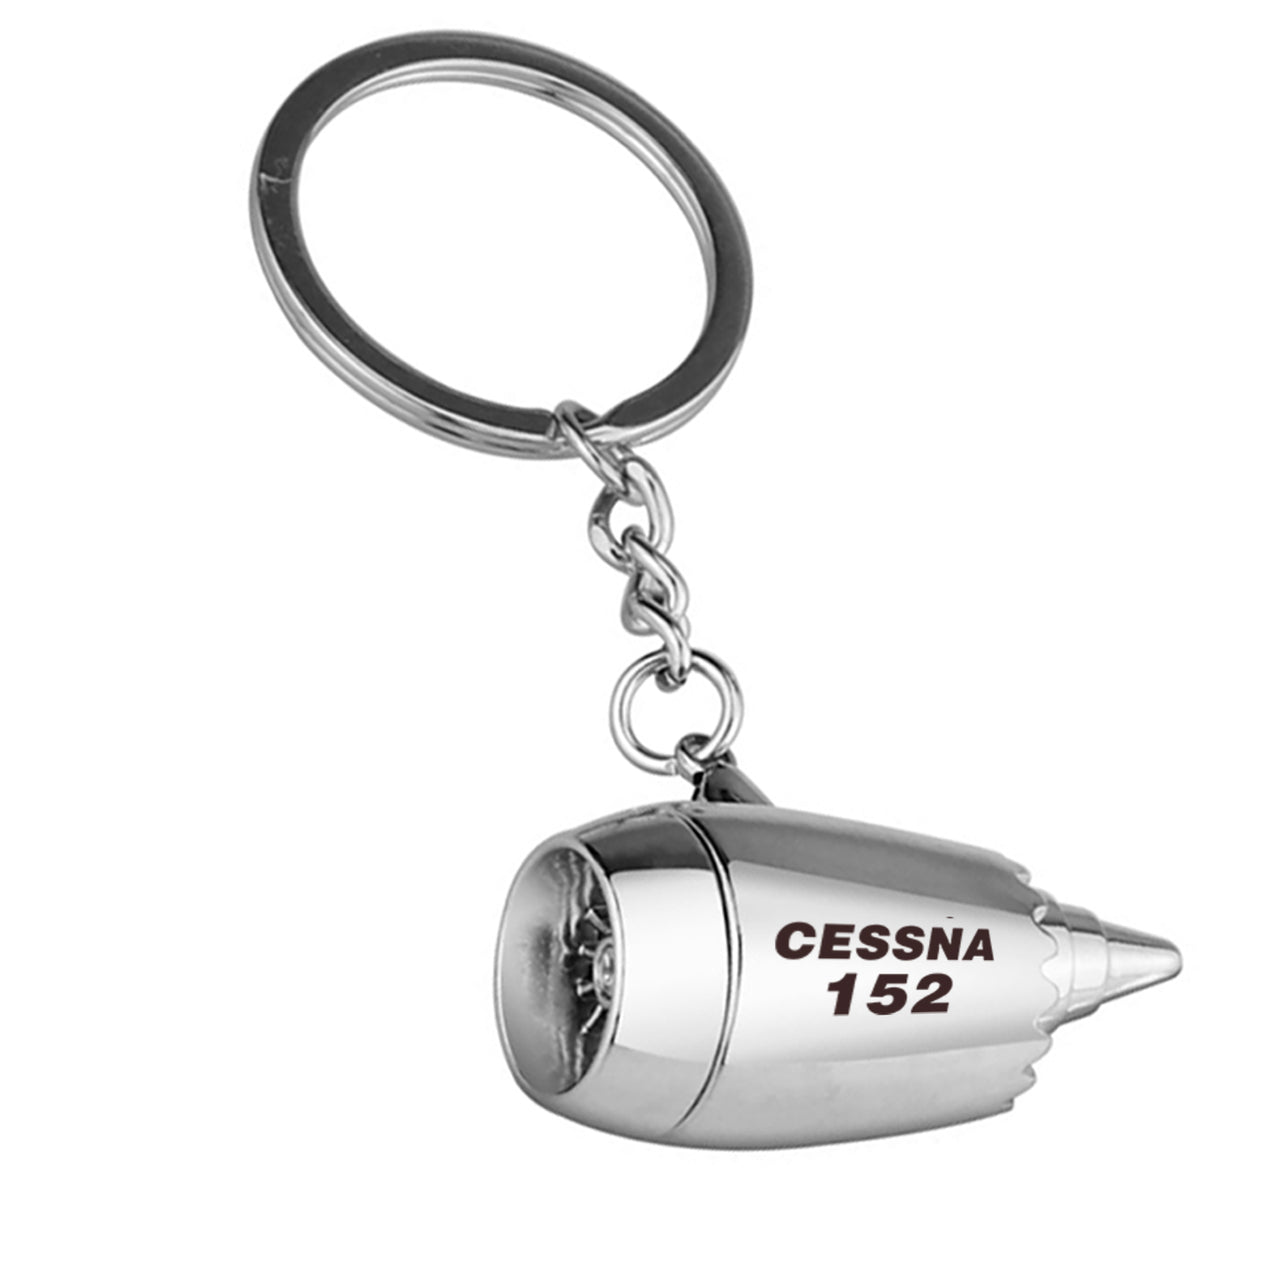 The Cessna 152 Designed Airplane Jet Engine Shaped Key Chain